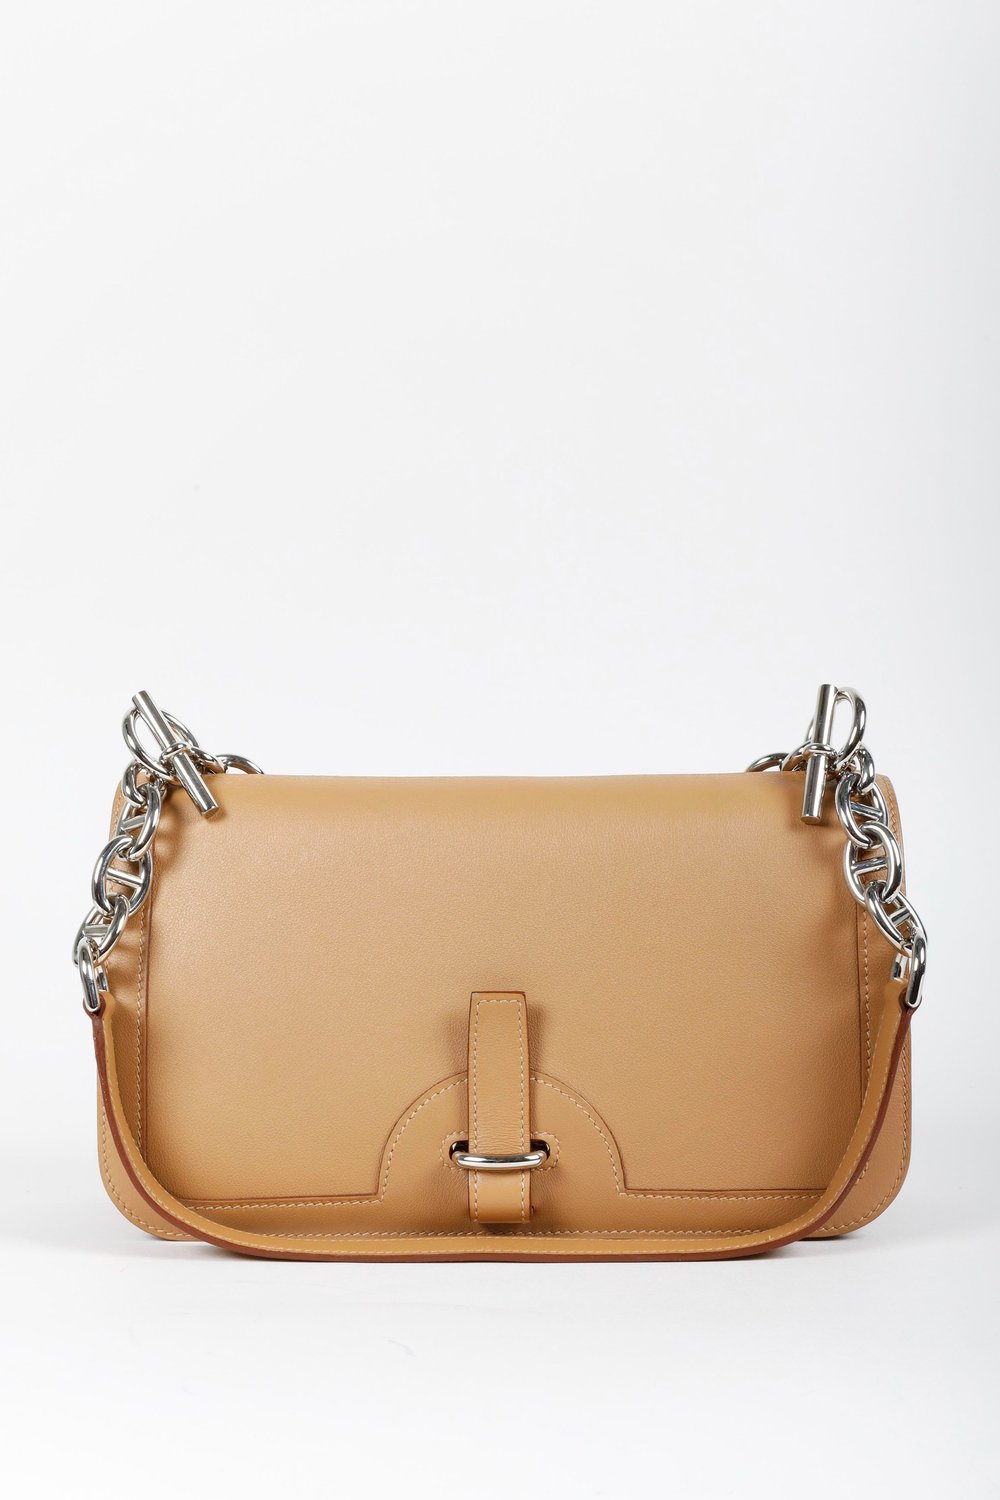 Hermes Chain d'Ancre Leather Bag